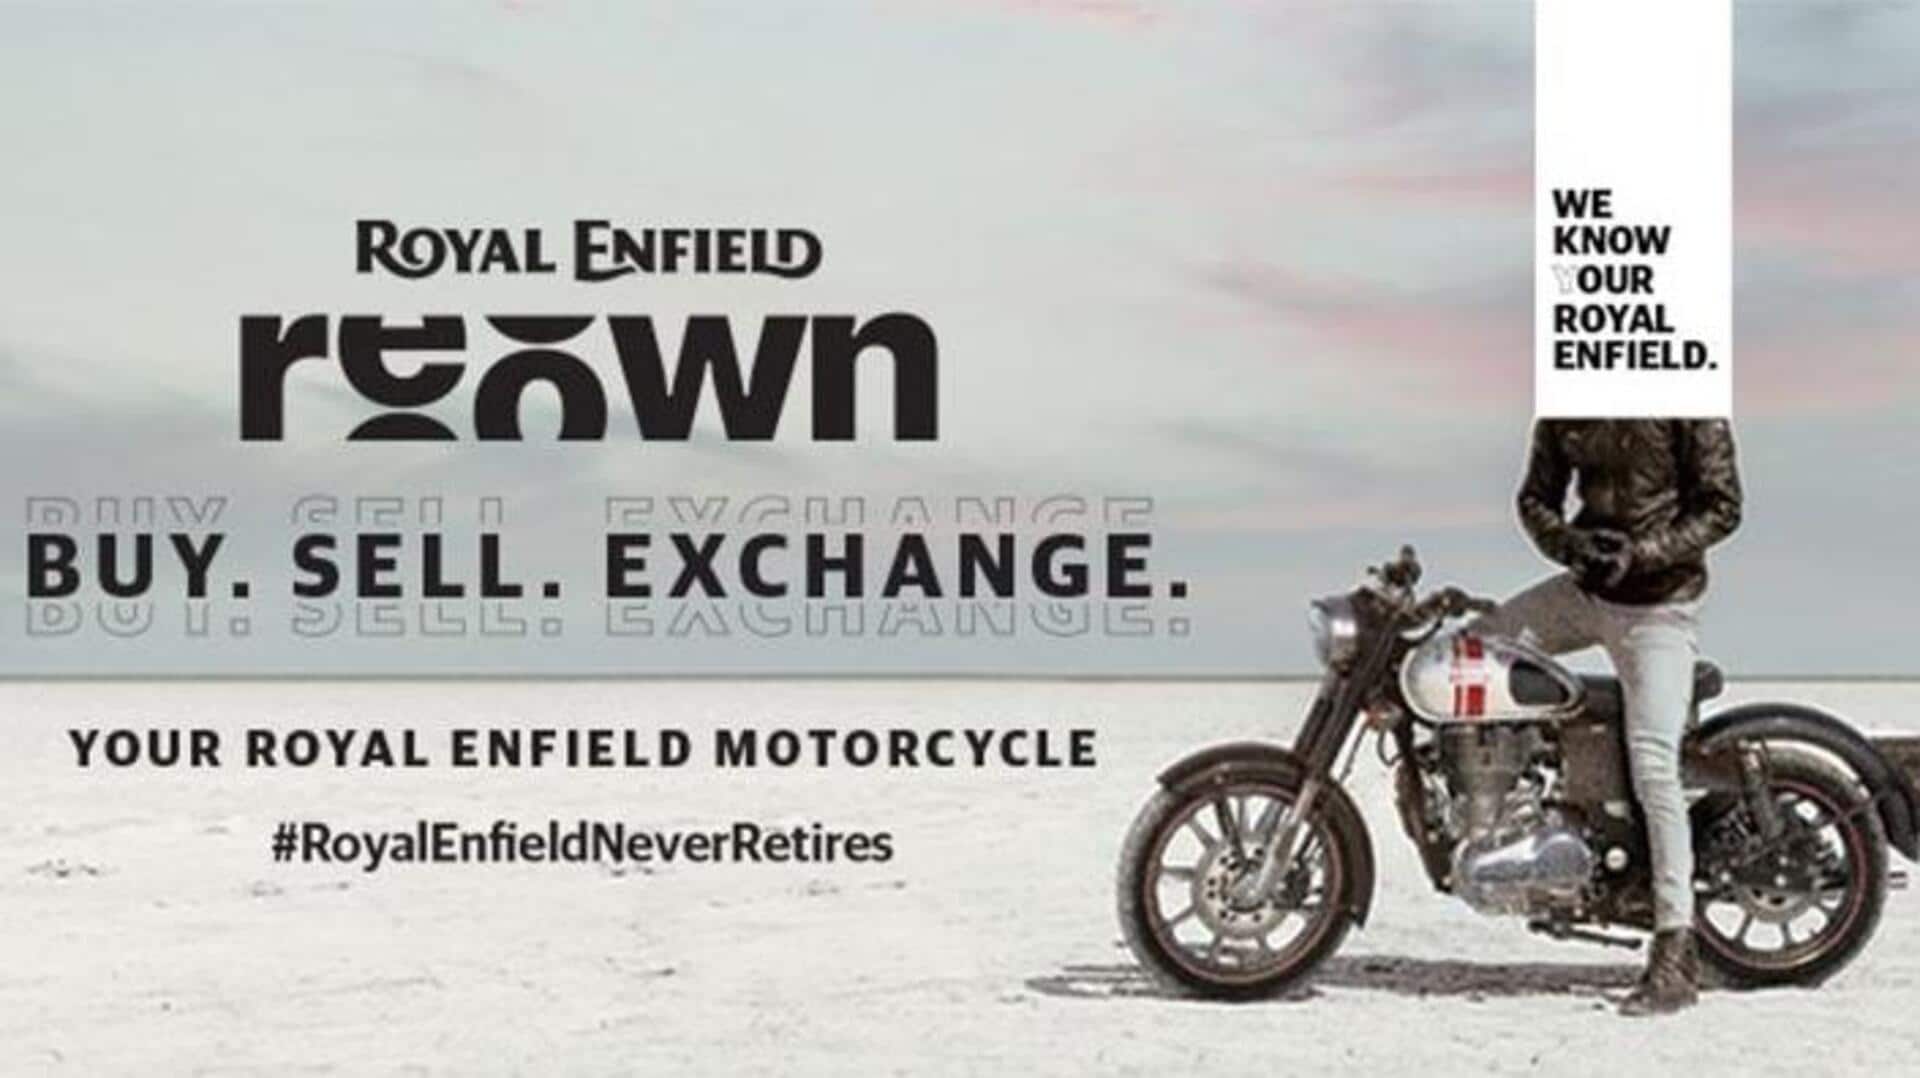 Royal Enfield launches 'Reown' program for pre-owned motorcycles in India